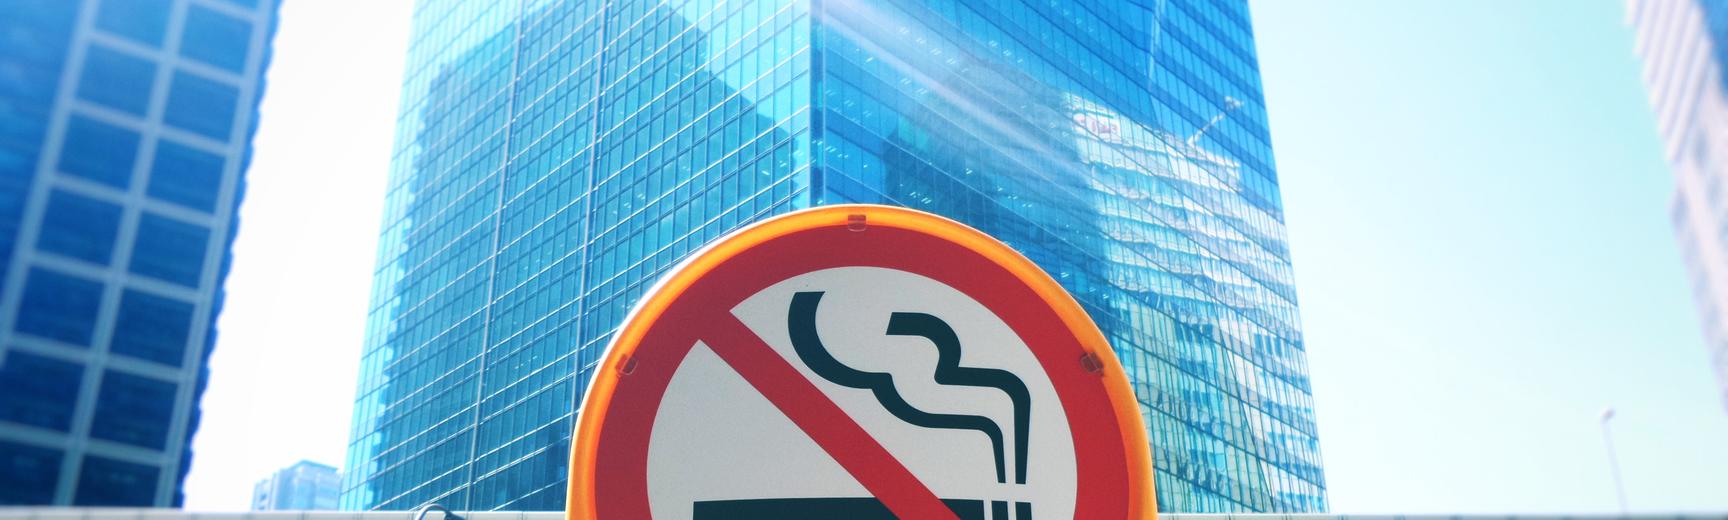 no smoking sign in front of office block